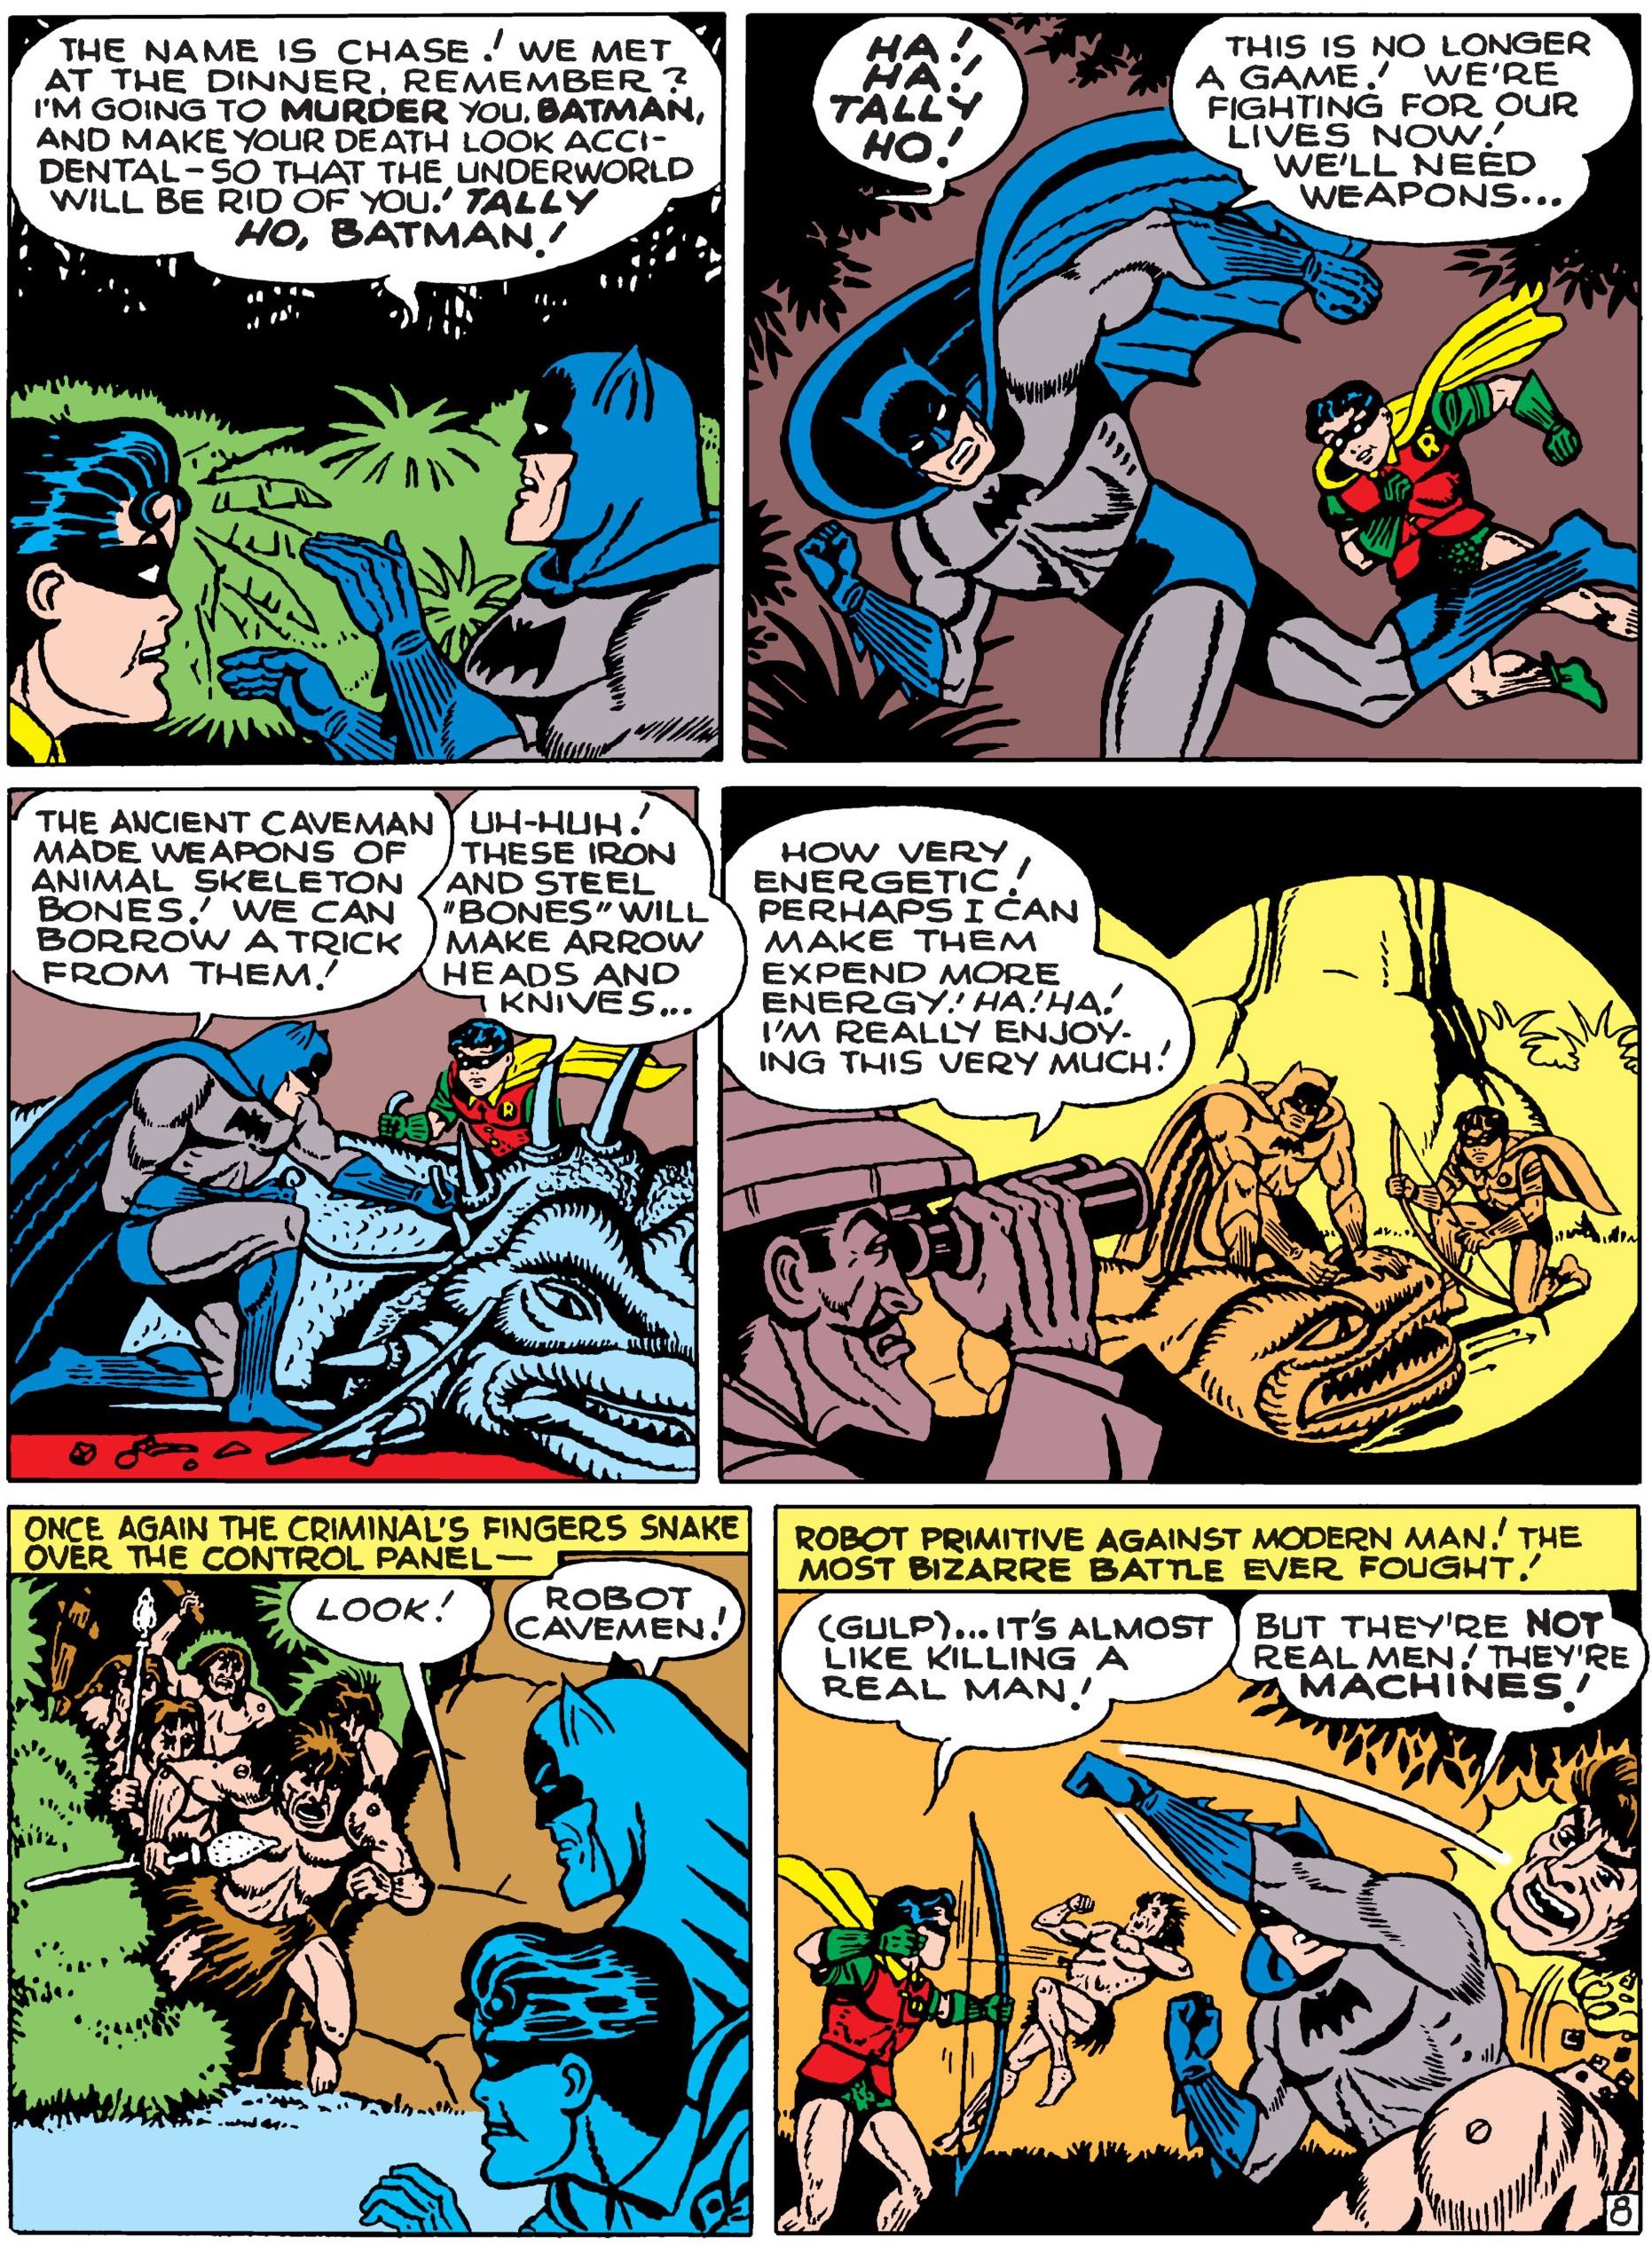 Batman and Robin are hunted in "The Most Dangerous Game" on a Dinosaur theme park